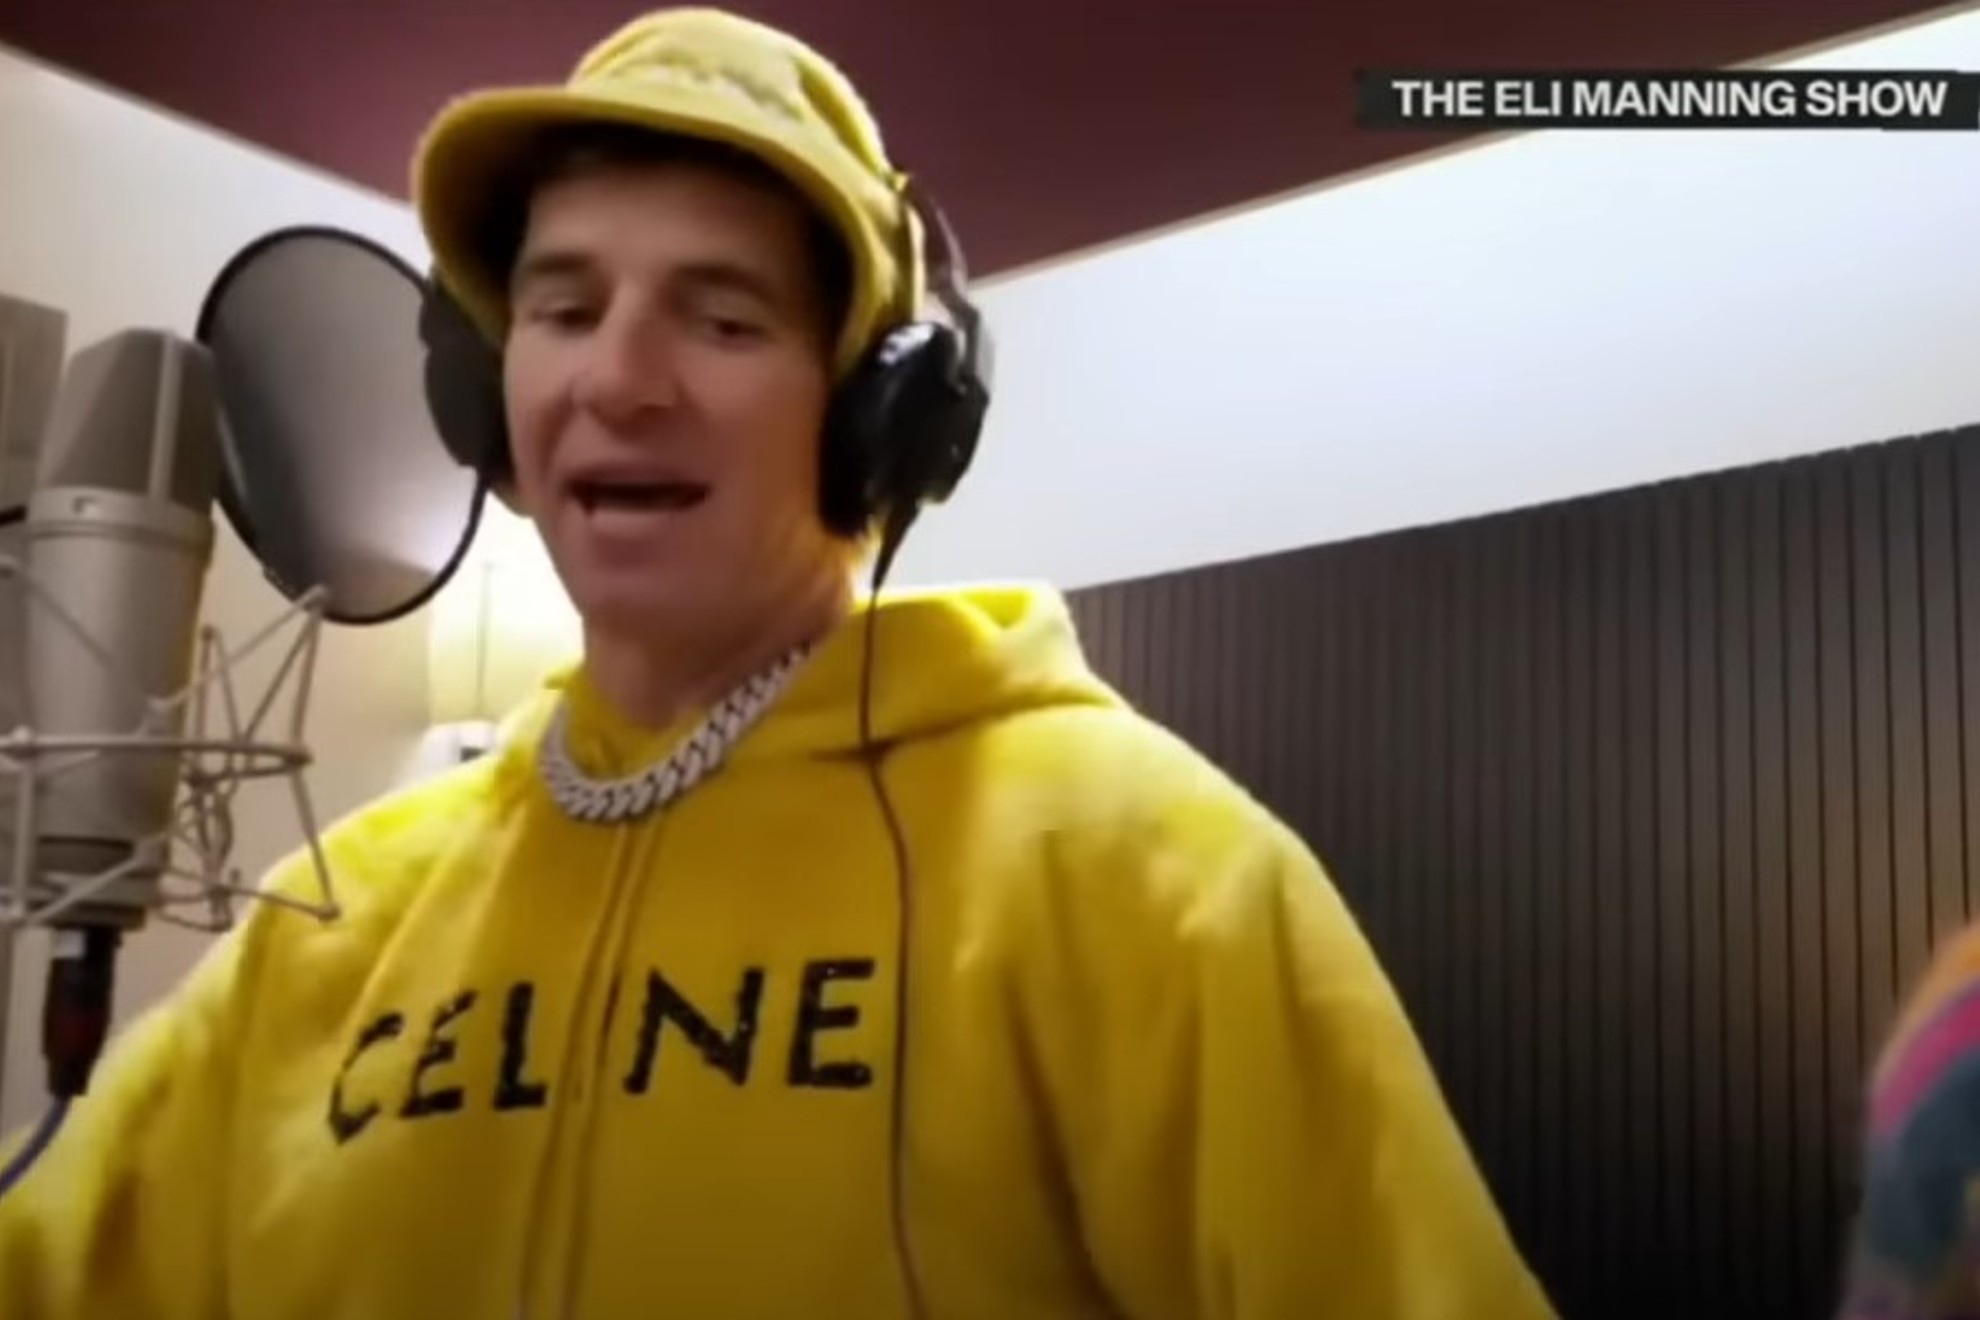 Eli Manning rapping at his show.